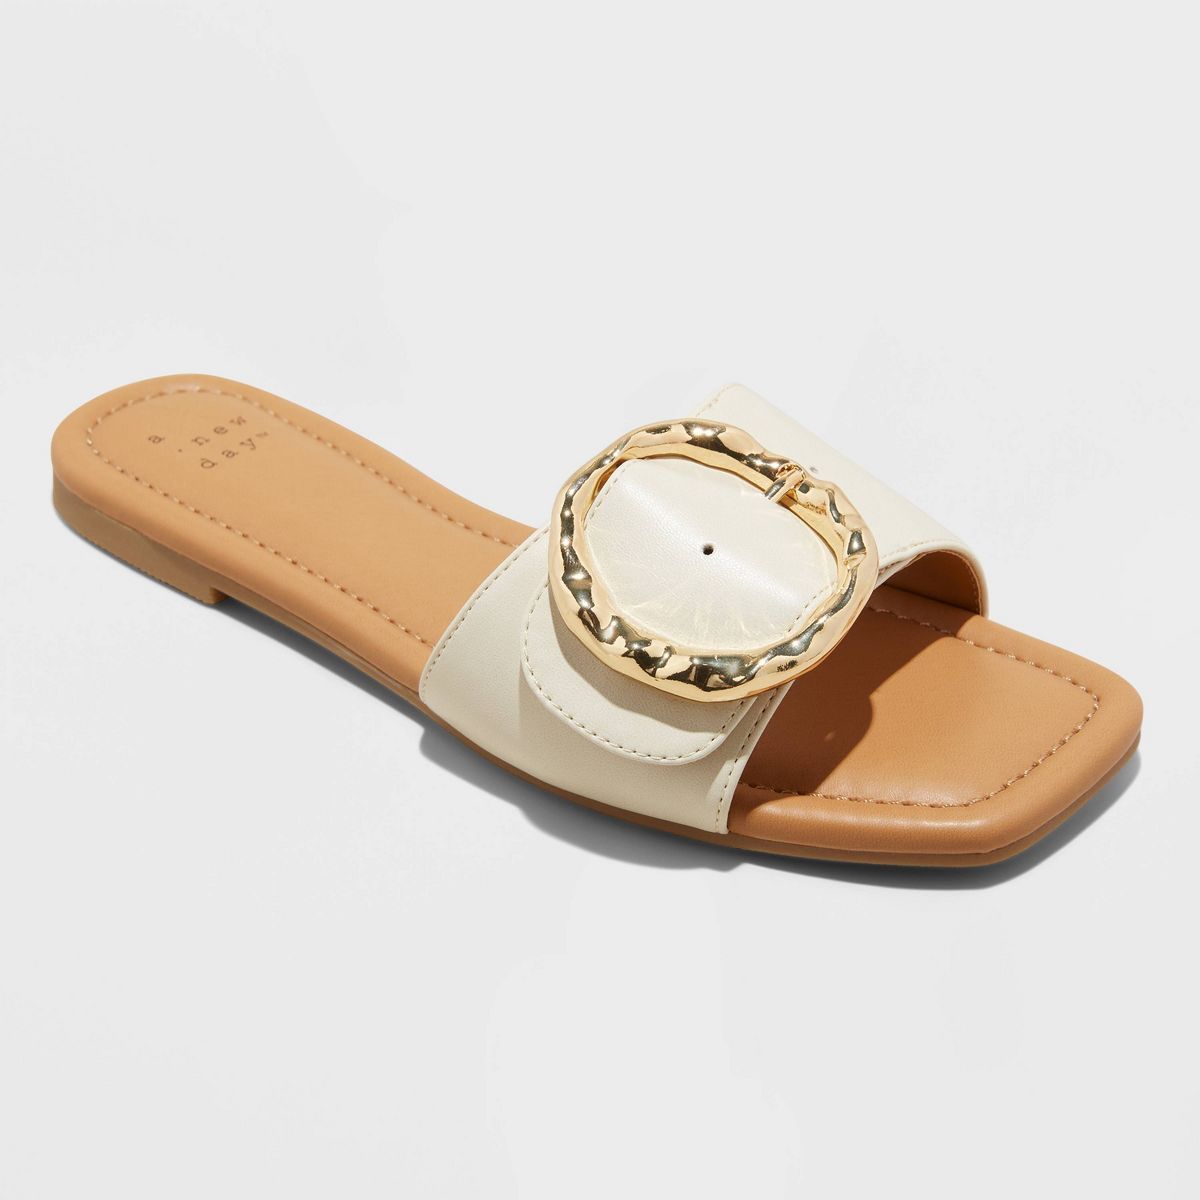 Women's Bennie Buckle Slide Sandals with Memory Foam Insole - A New Day™ Cream 6.5 | Target